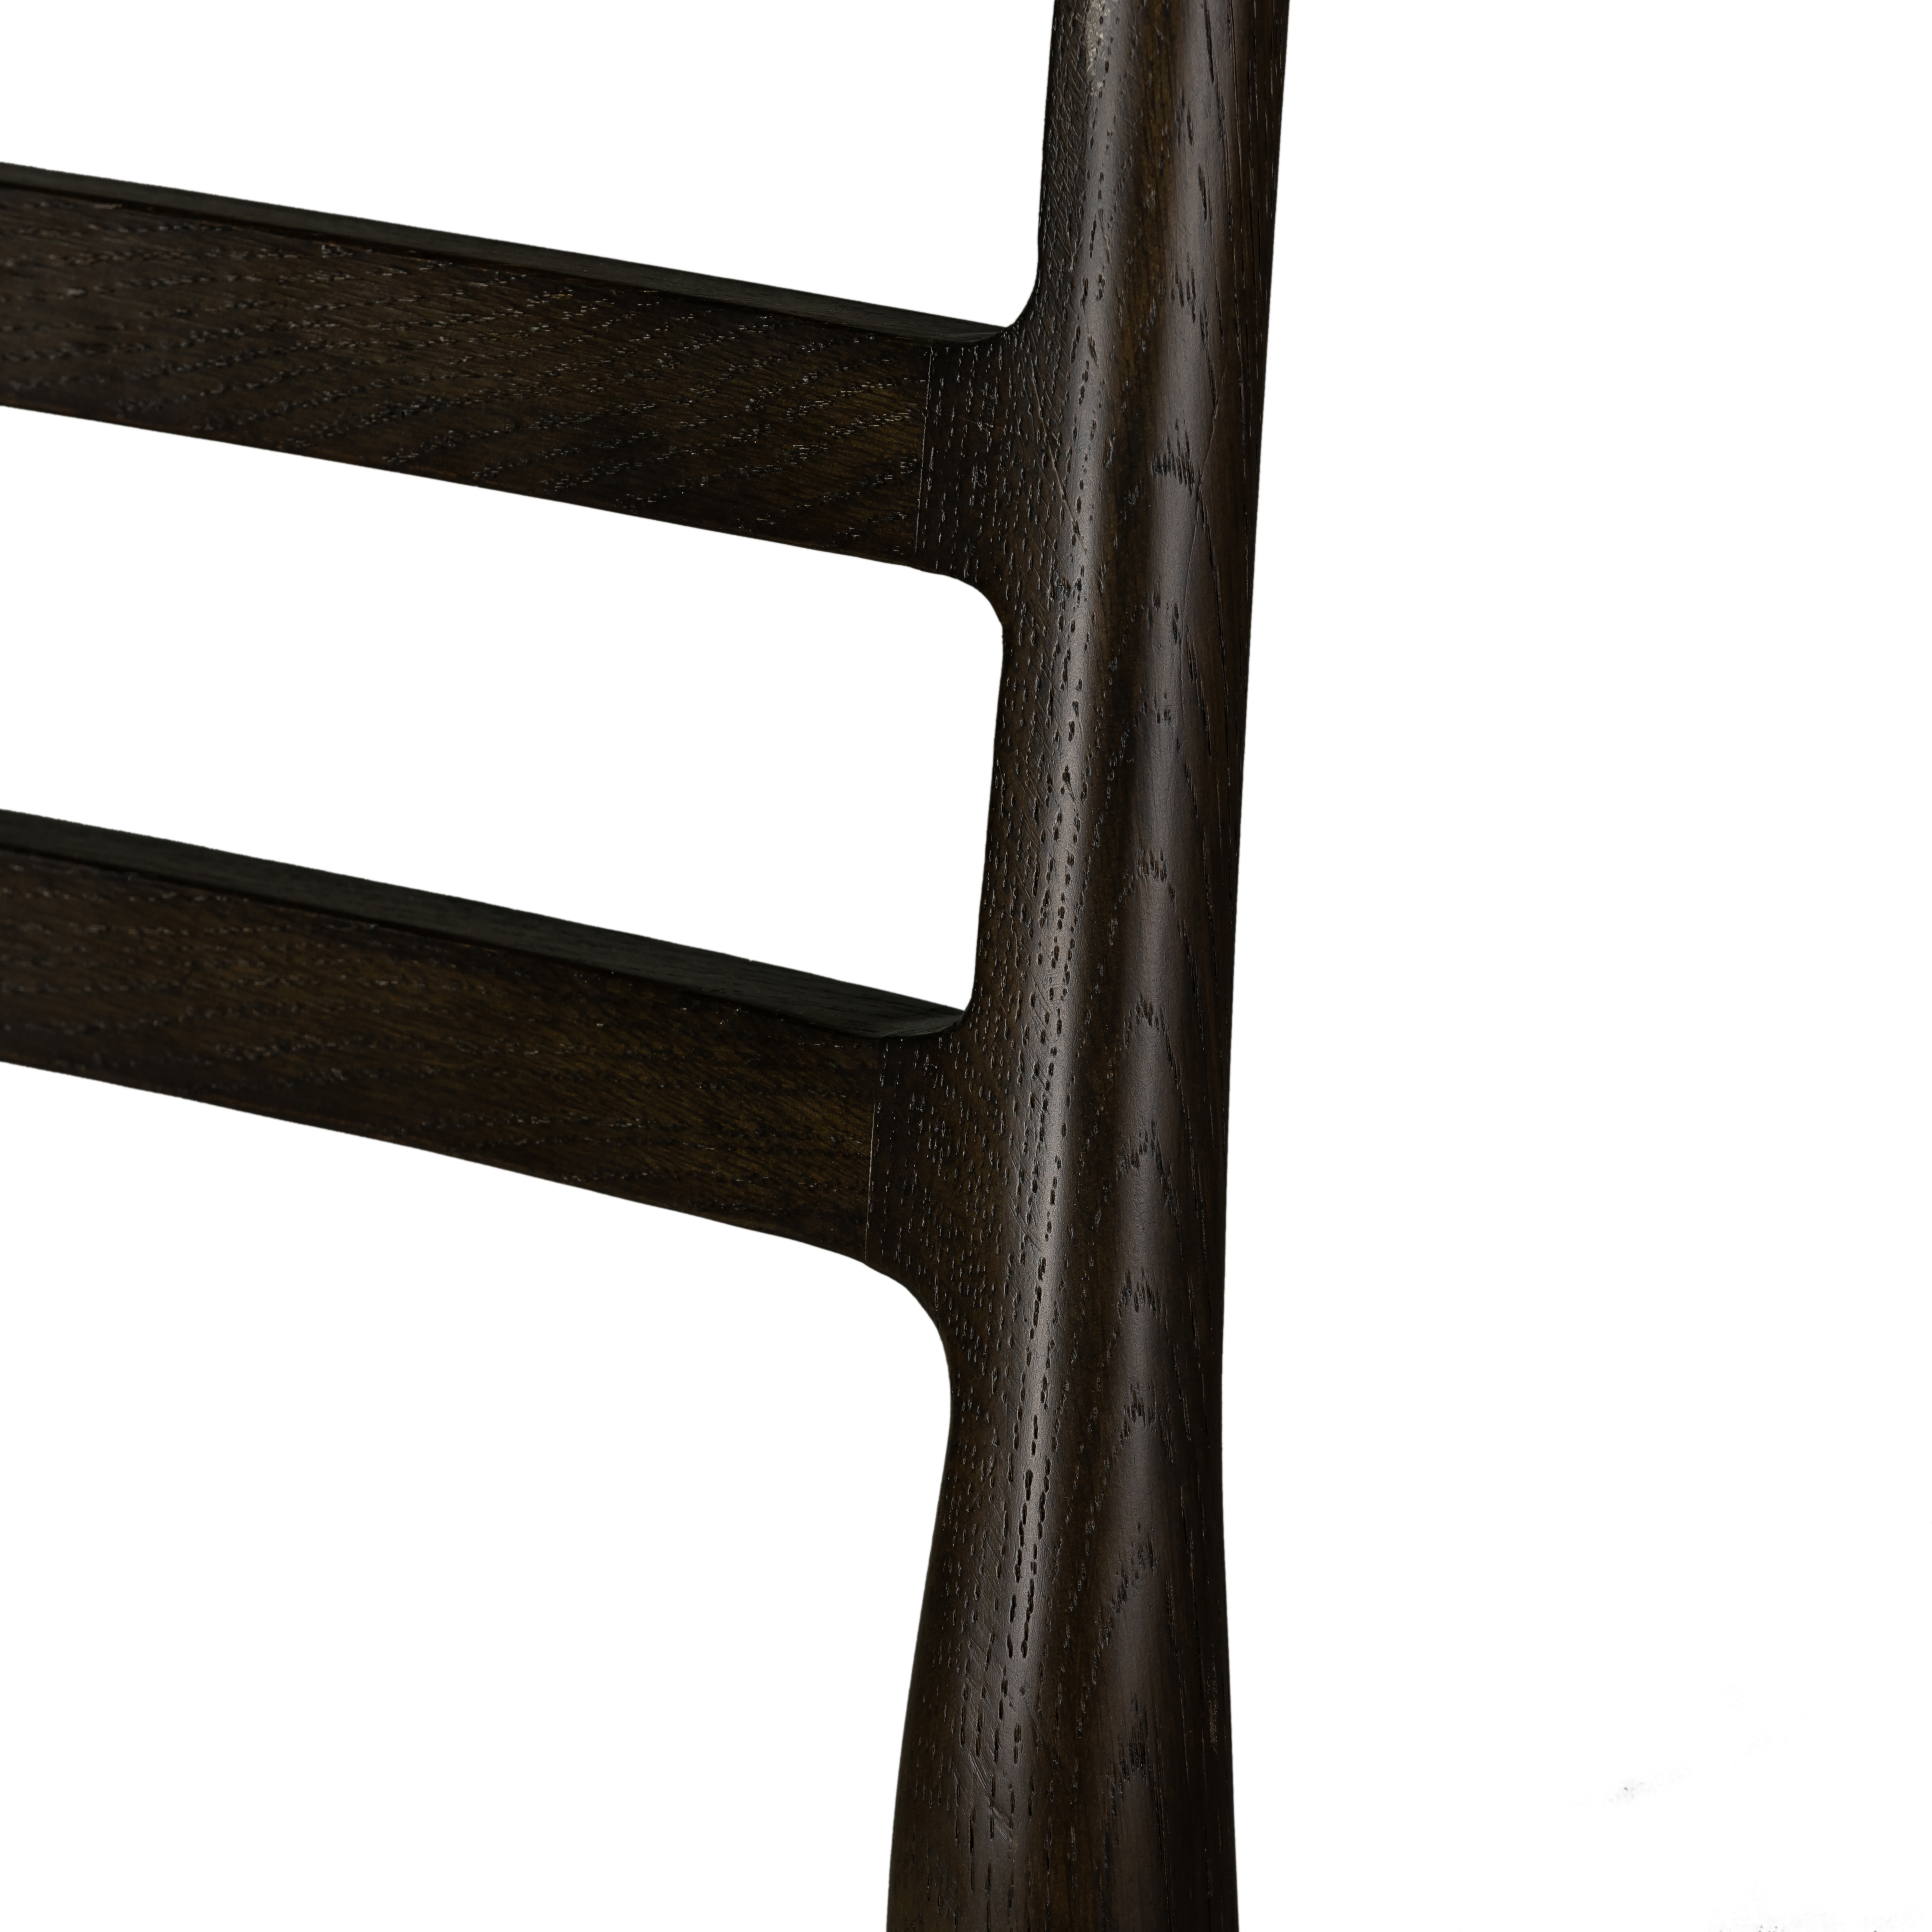 Glenmore Dining Chair-Essence Natural - Image 8